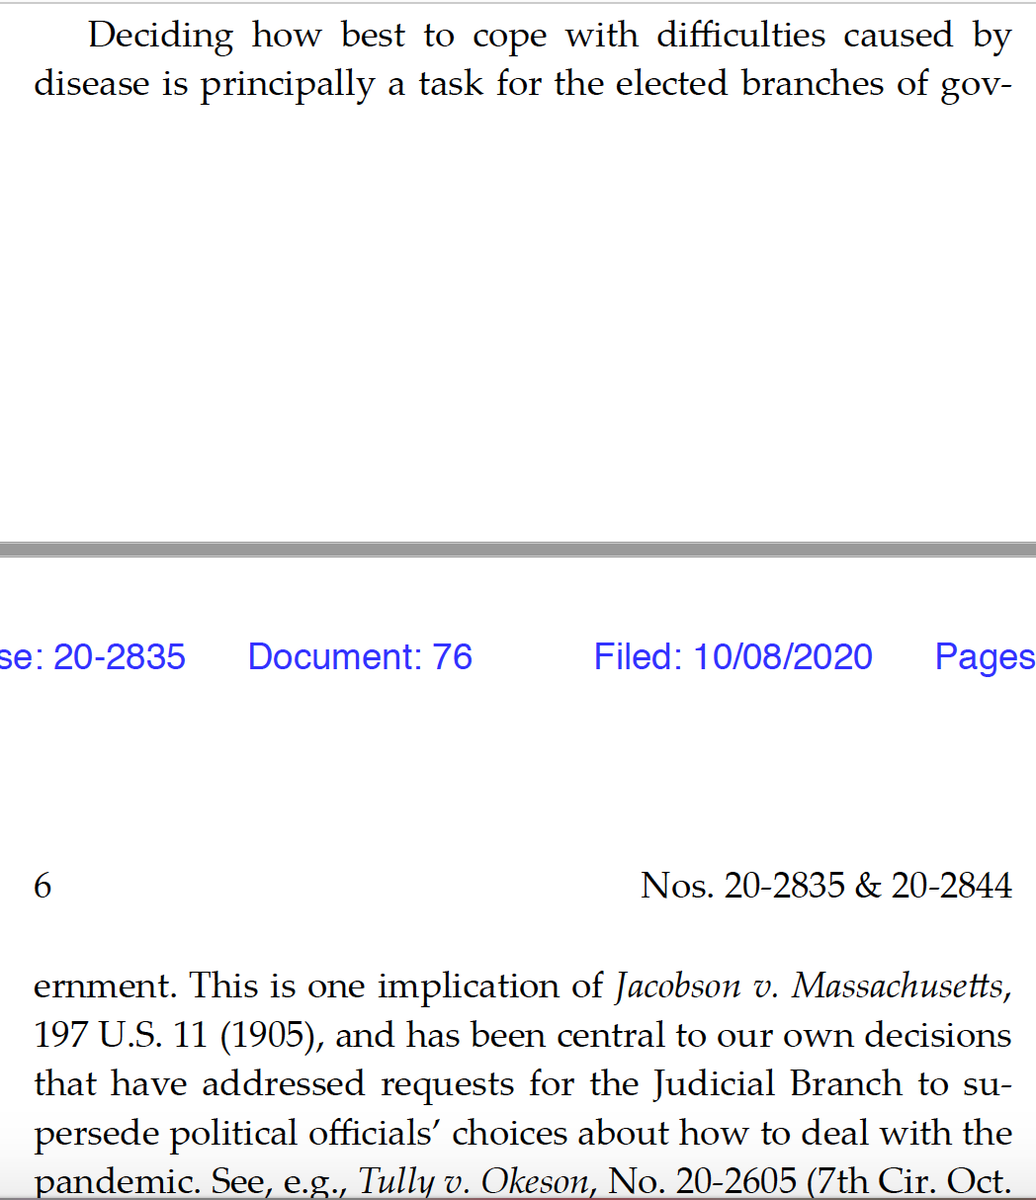 7th Circuit, reversing a district court decision that had extended various deadlines for registration and absentee ballot delivery in Wisconsin. 8/ https://www.dropbox.com/s/vr3mfh6y34taa5c/DNC%20v.%20Bostelman--7th%20Cir%20Wisconsin%20absentee.pdf?dl=0